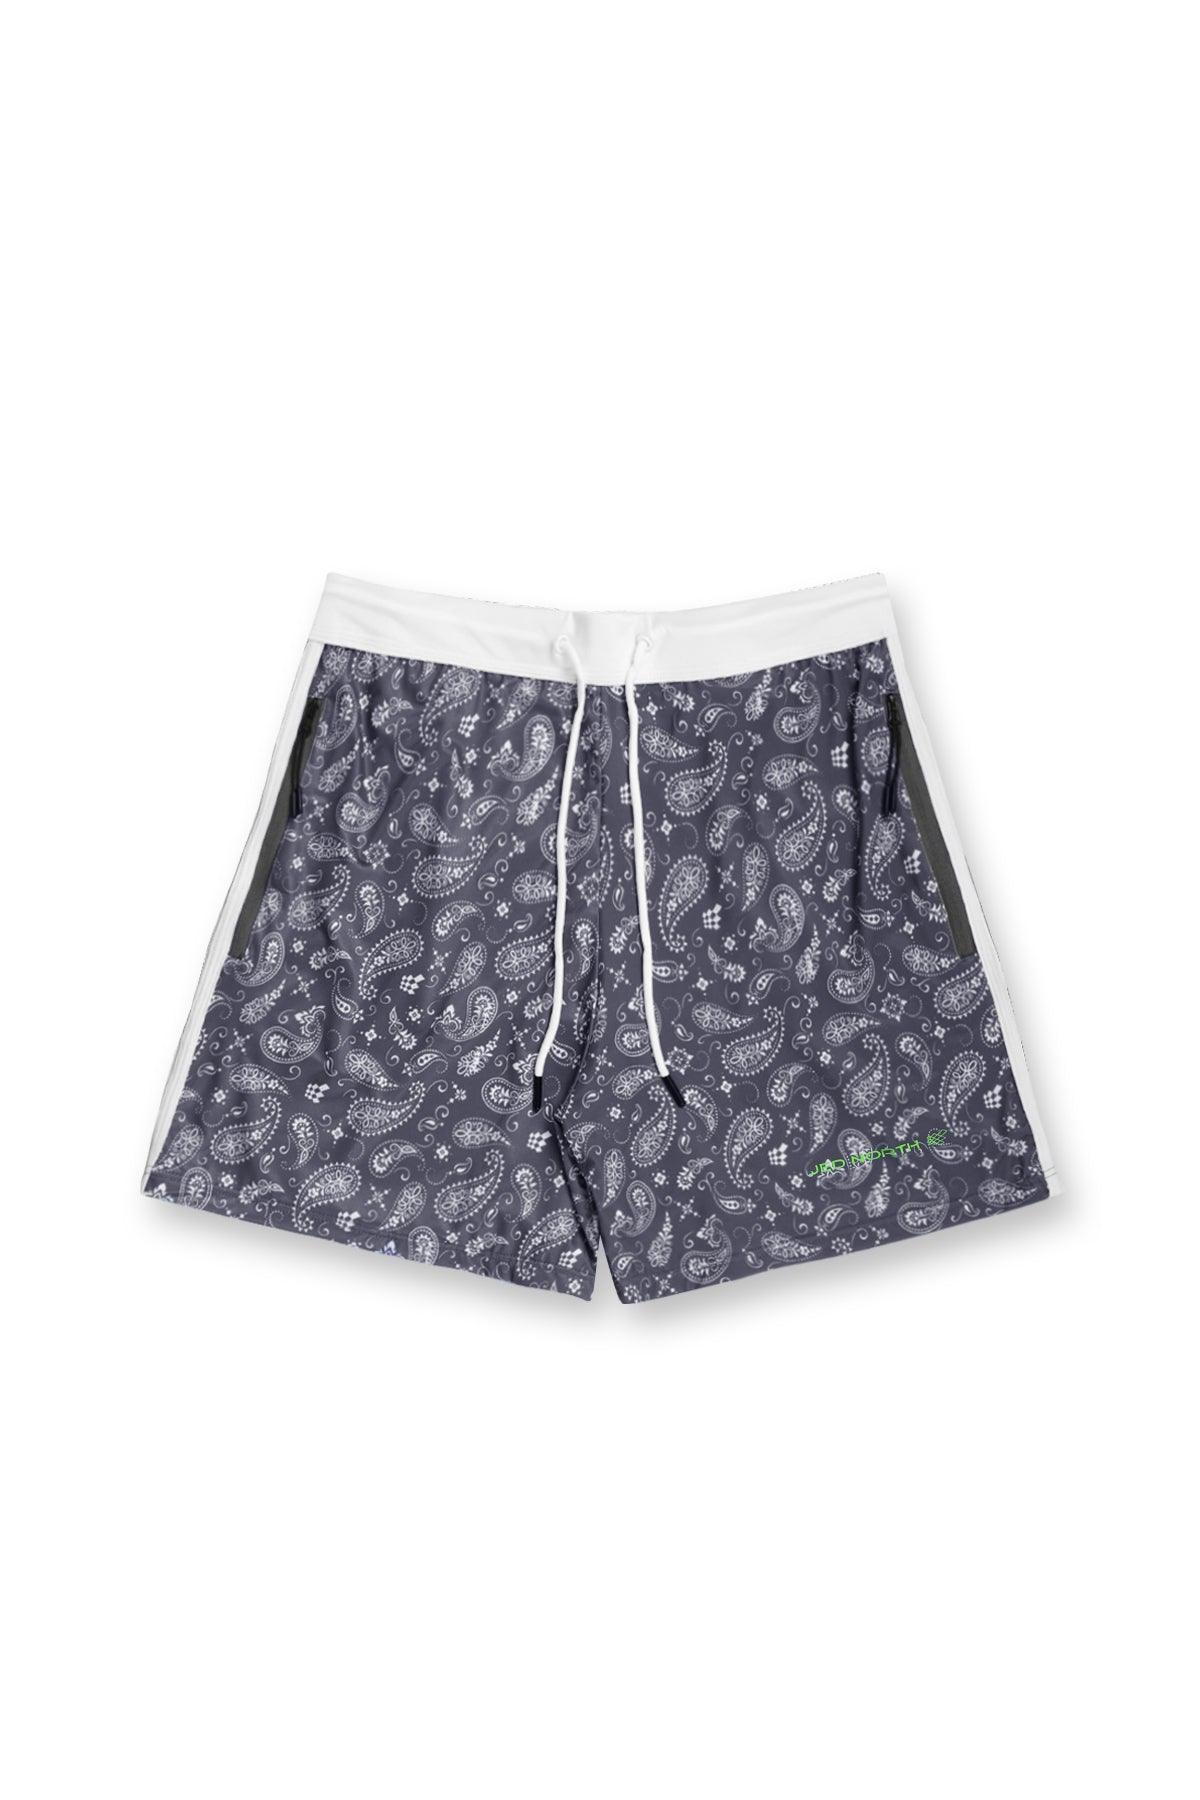 Ace Graphic Casual 5" Shorts 2.0 - Paisley - Jed North Canada